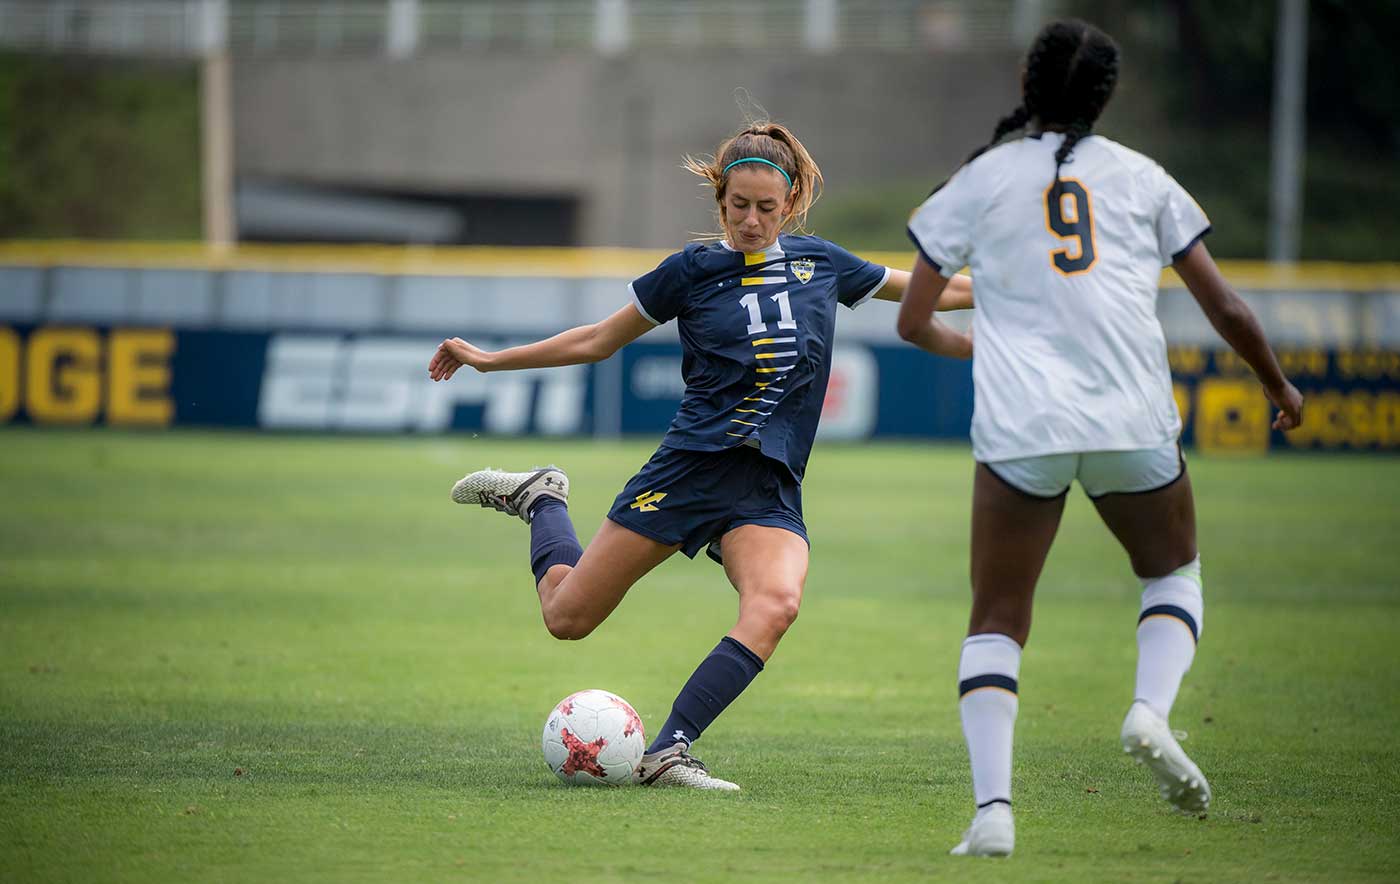 Natalie Widmer at the UC San Diego Women’s Soccer versus Cal game.